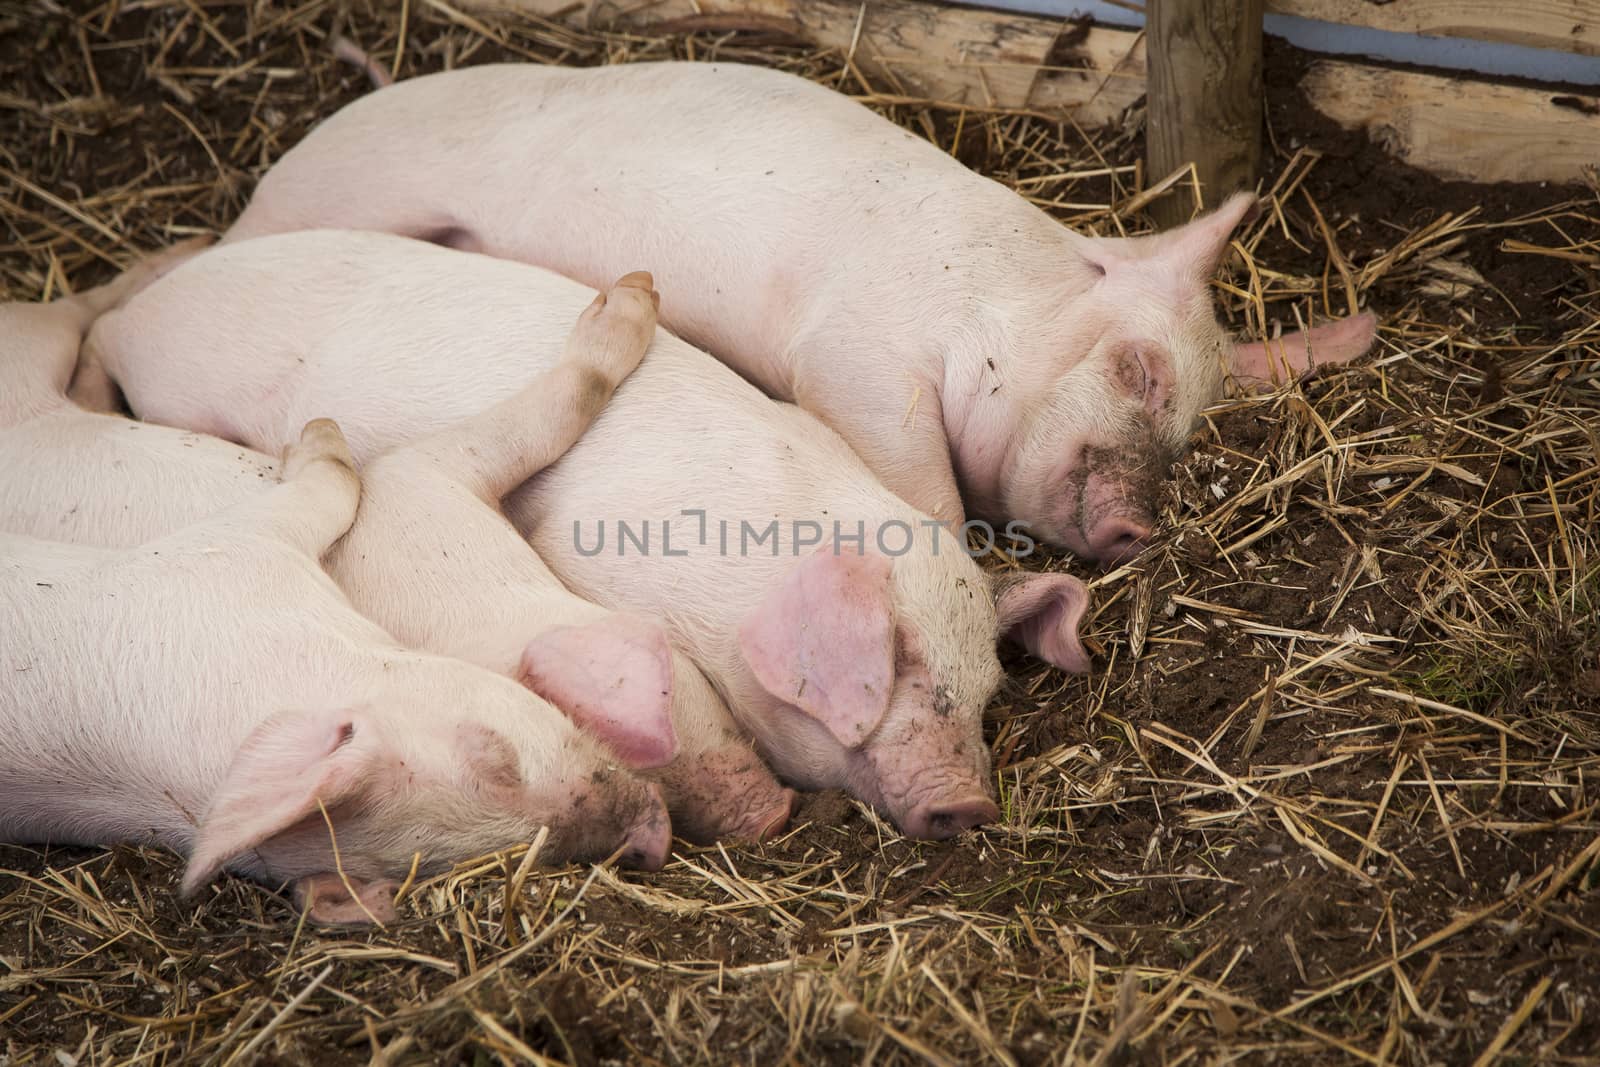 Four piglets sleeps together in the enclosure.